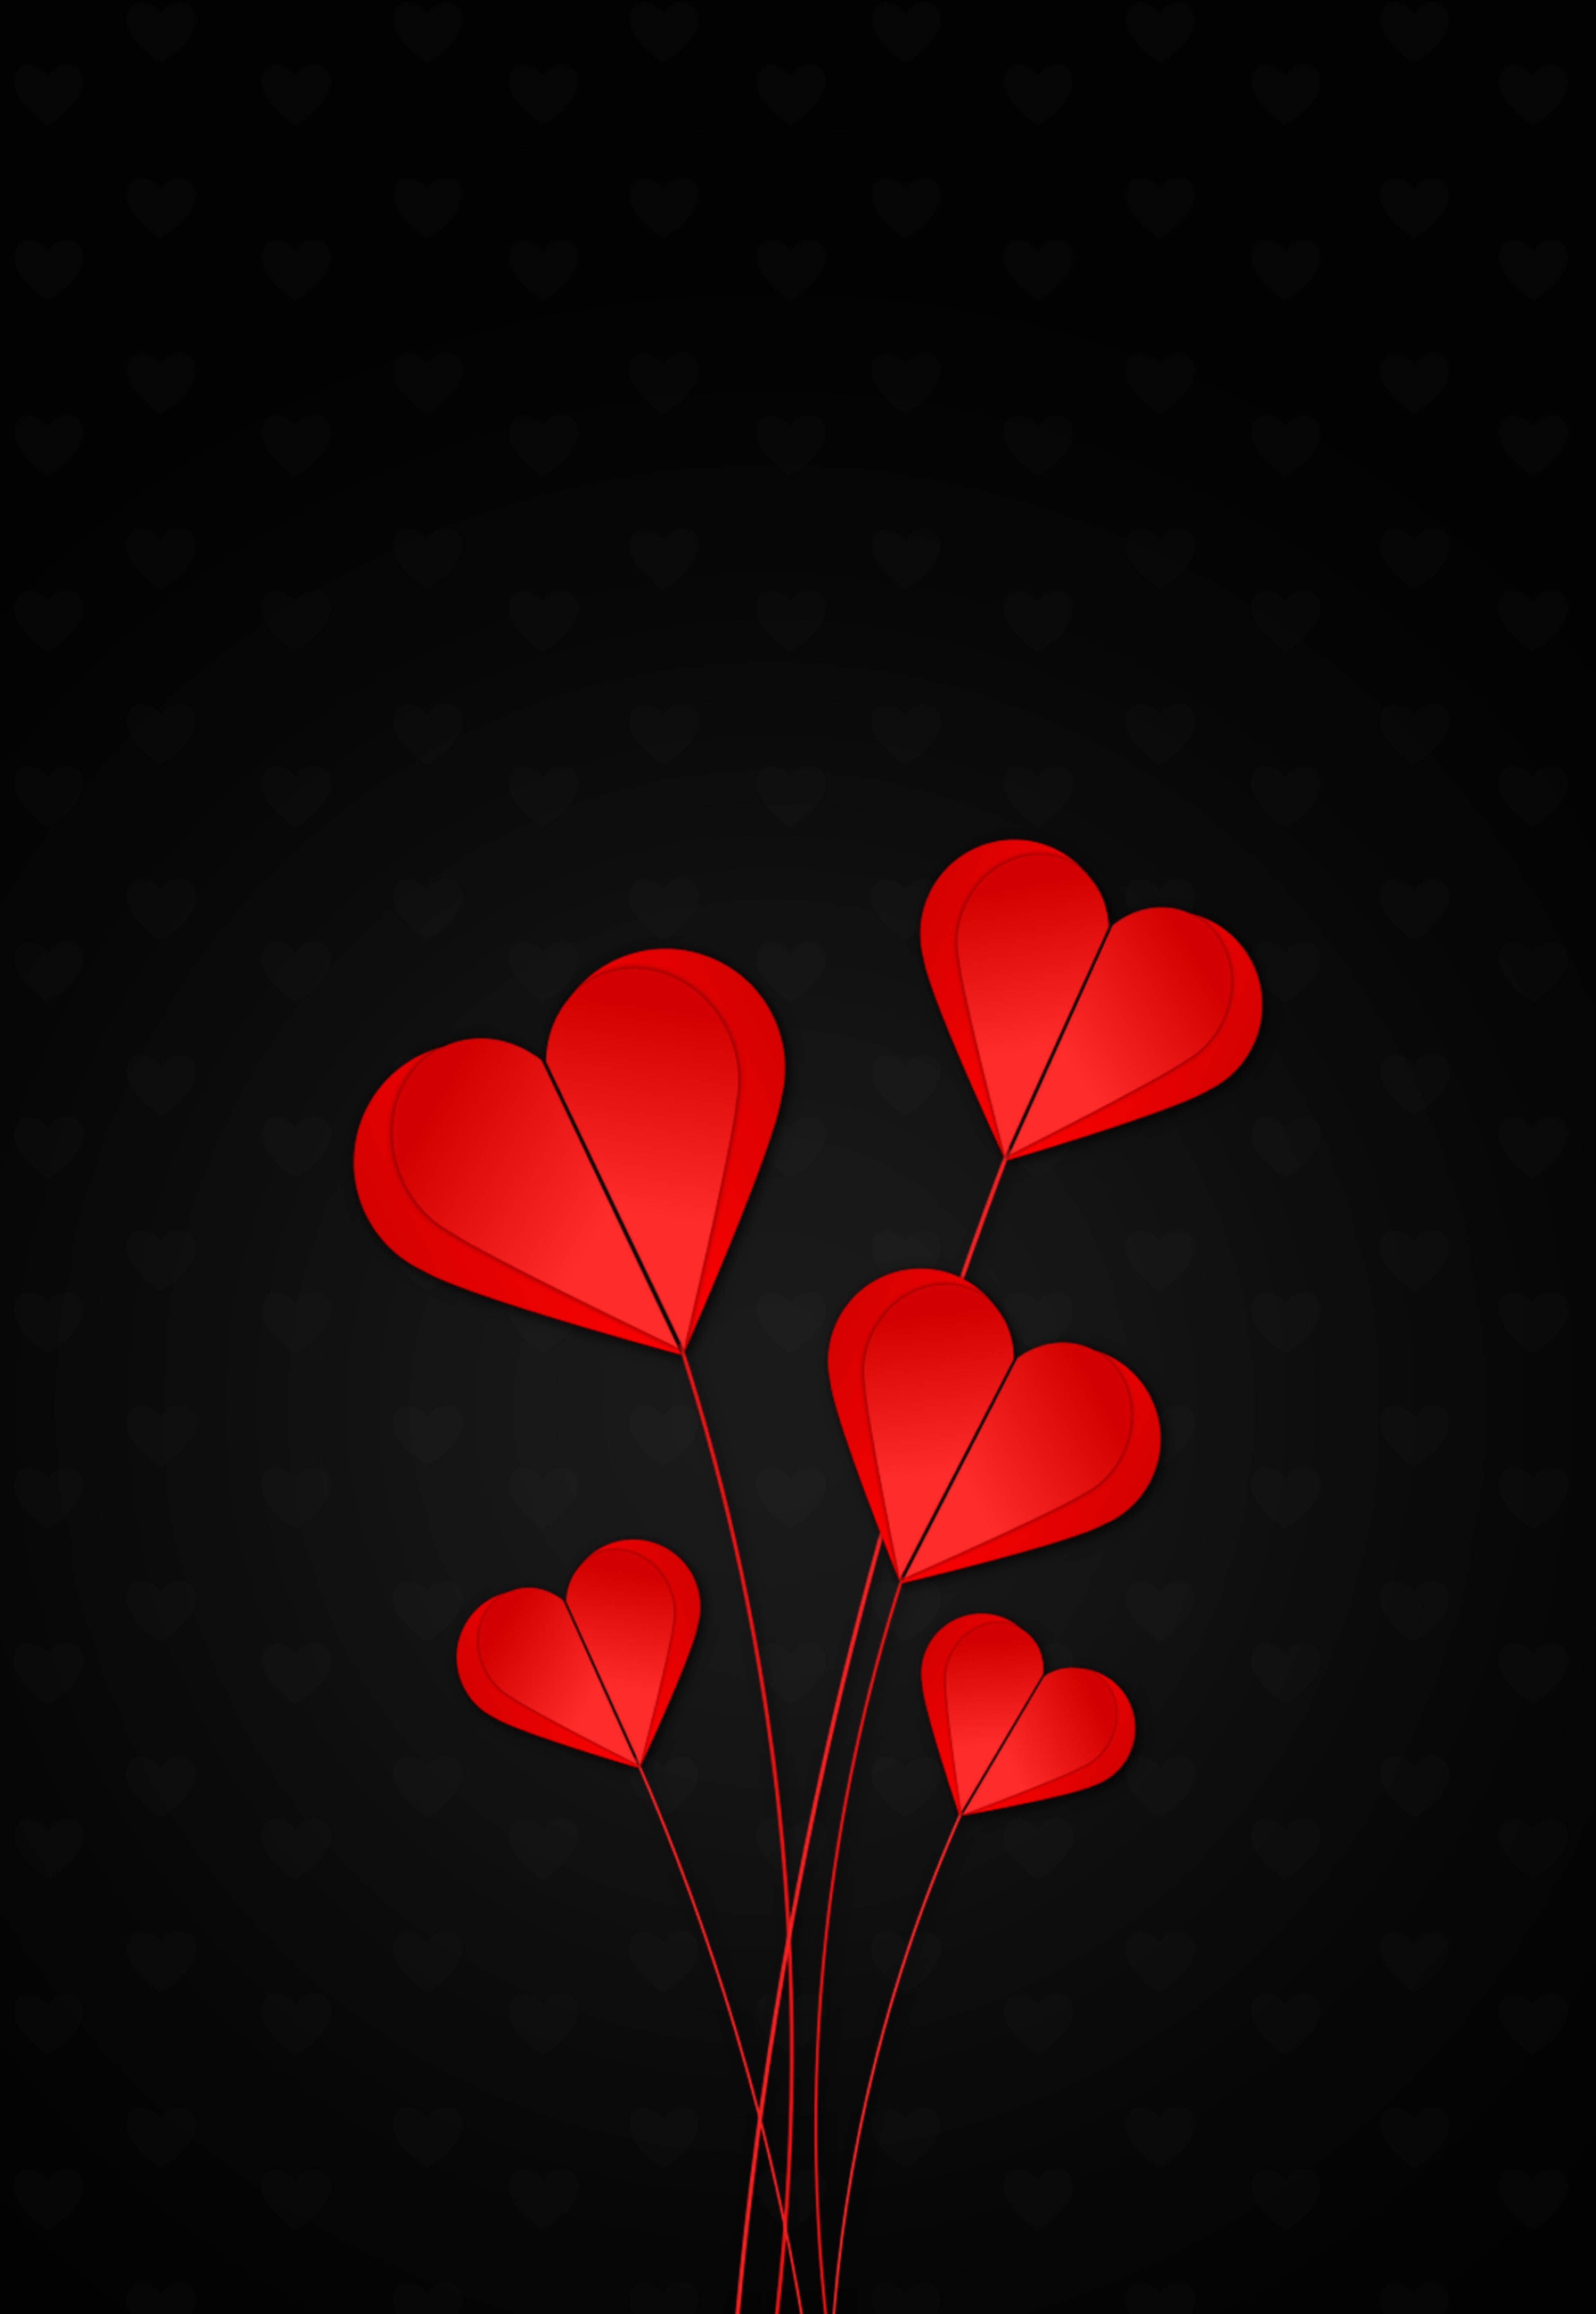 HD wallpaper hearts, black background, love, red